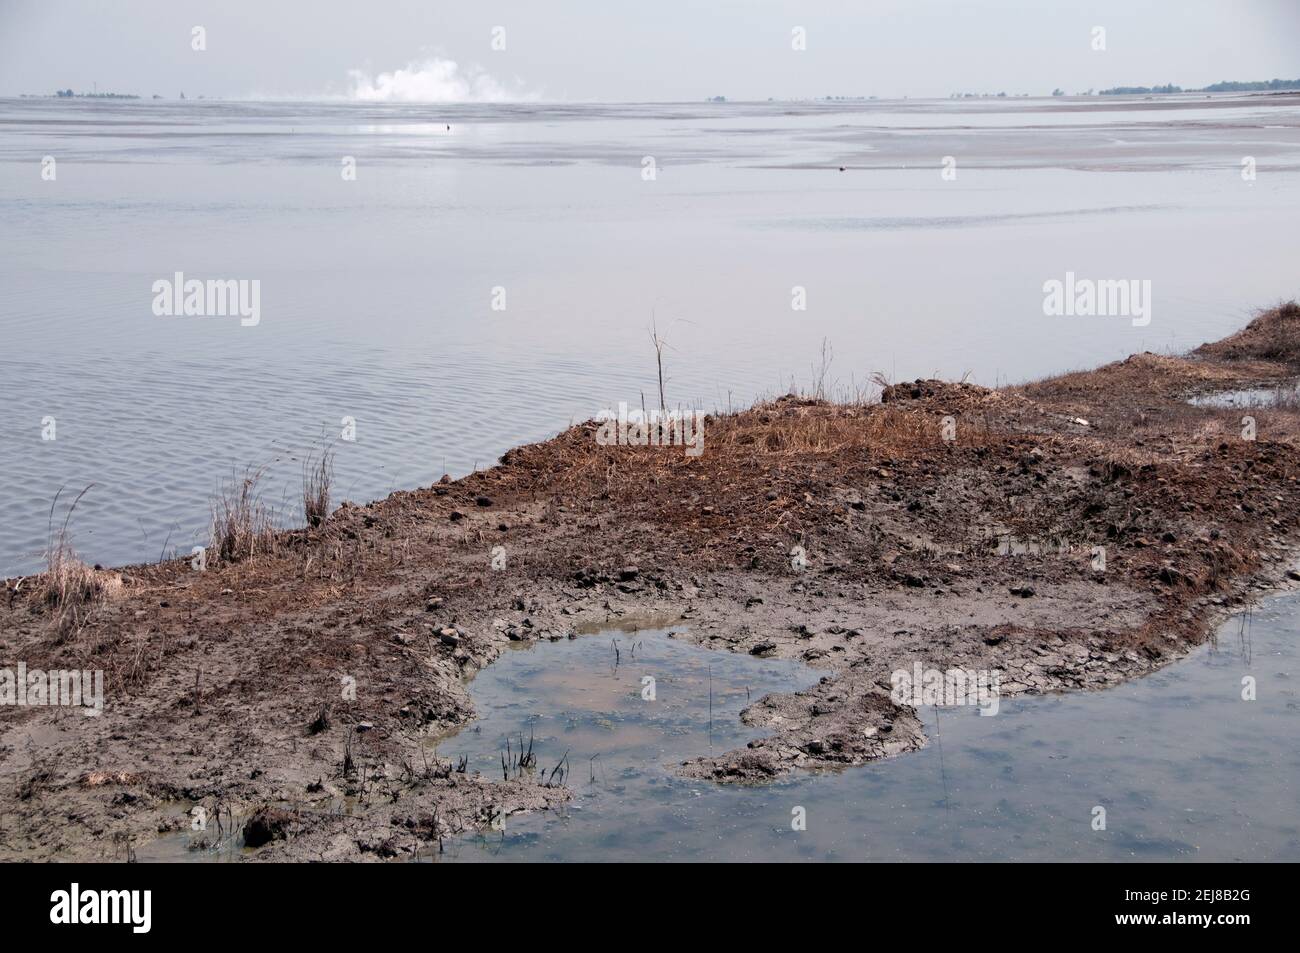 Mud lake environmental disaster and mud flow geyser which developed after drilling incident, Porong Sidoarjo, near Surabaya, East Java, Indonesia Stock Photo